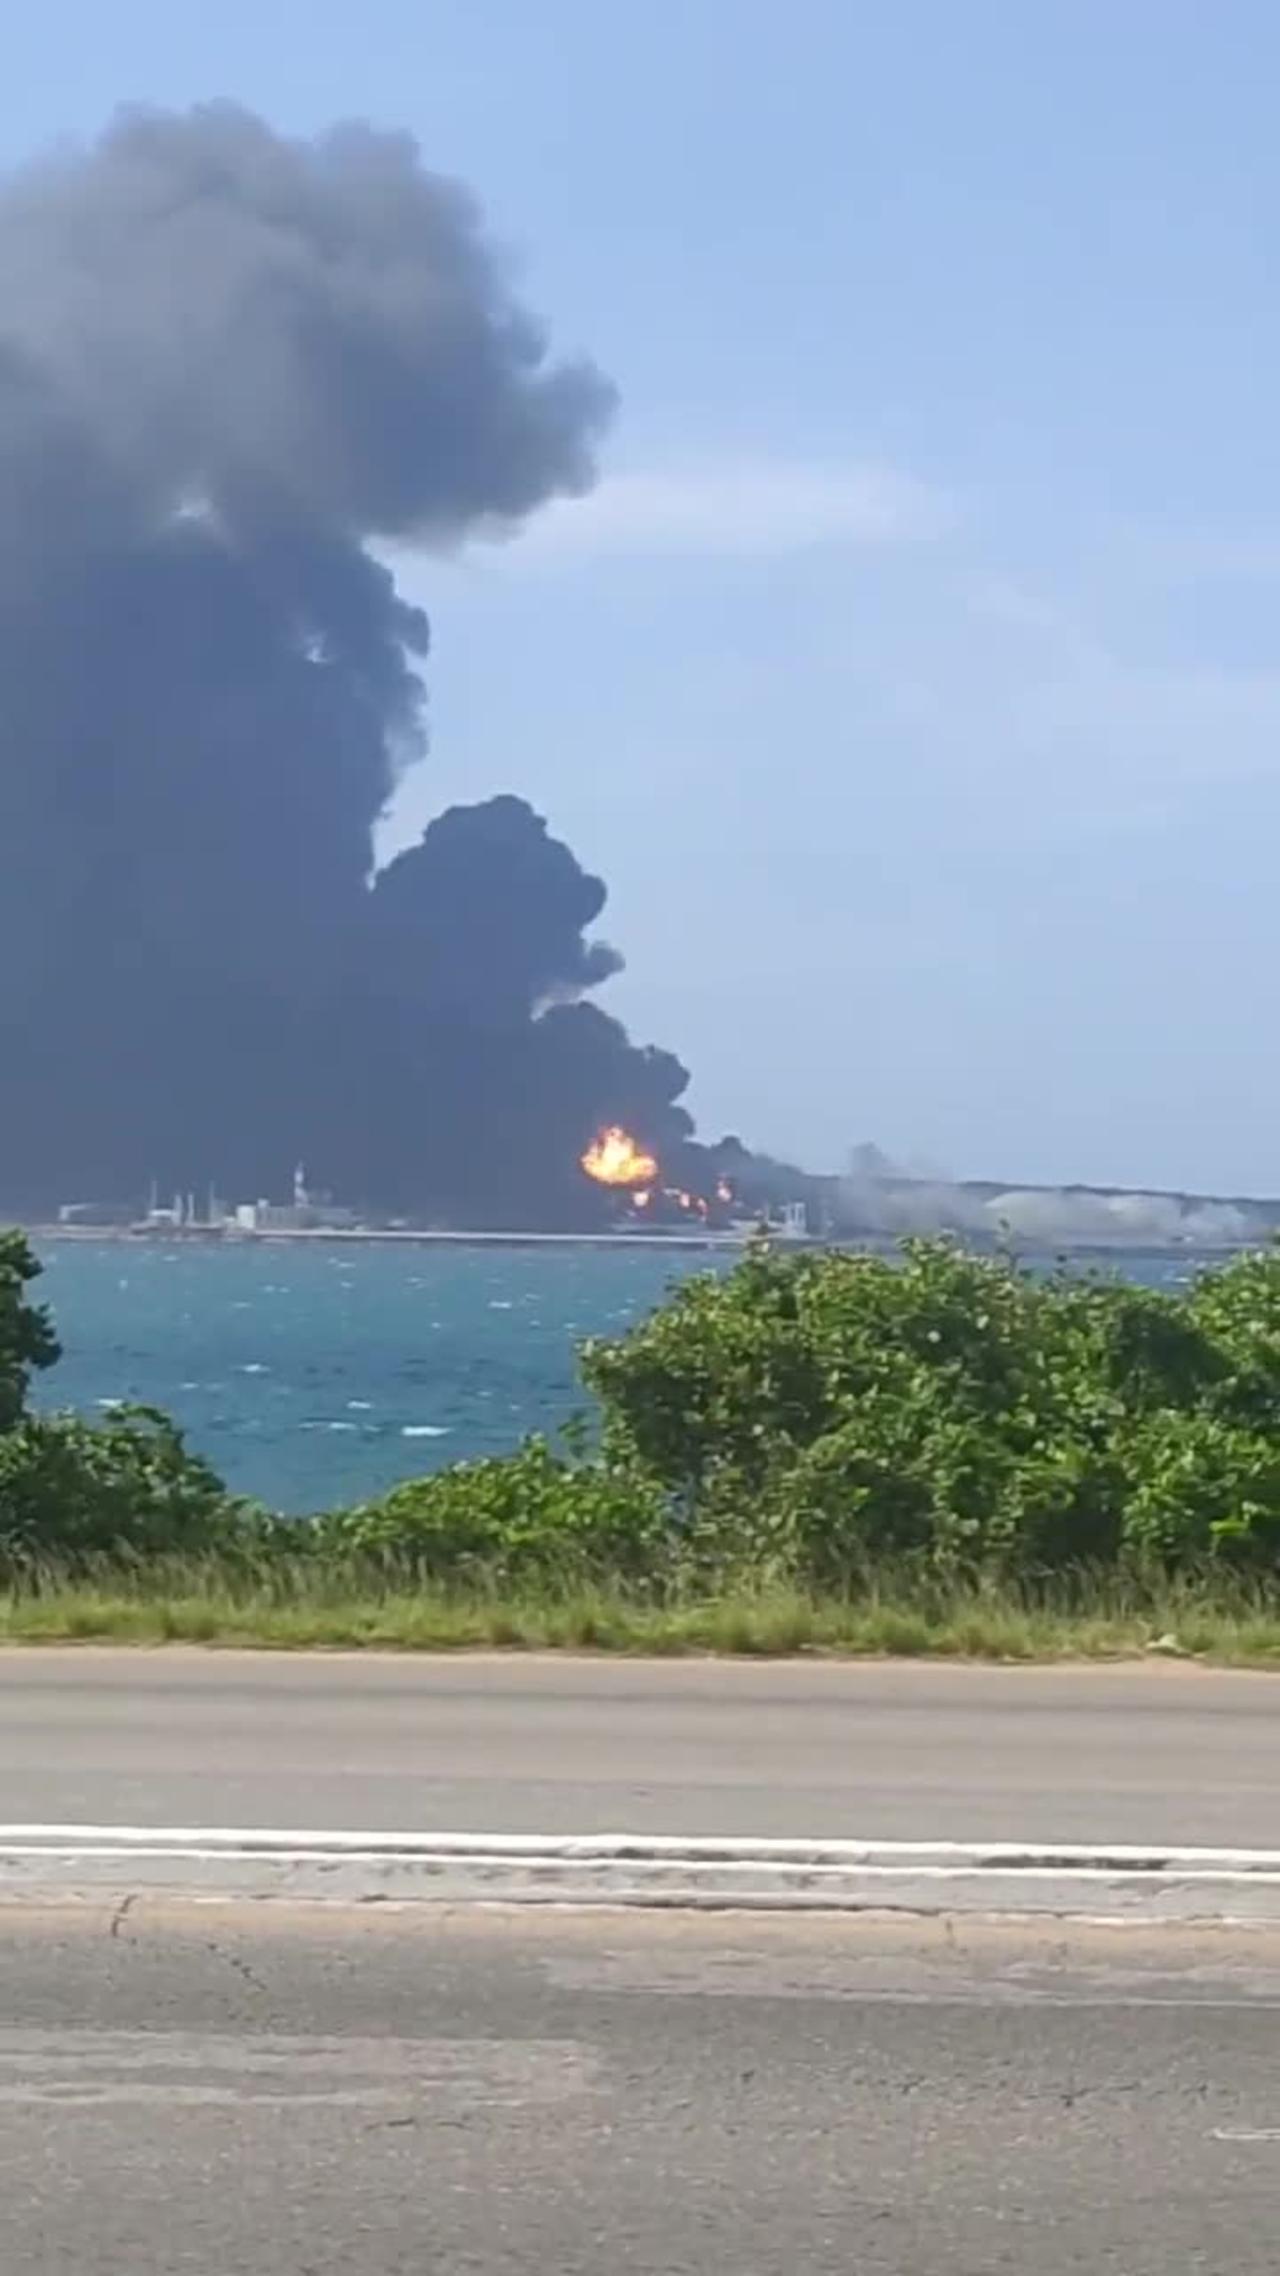 Another tank exploded at Cubas oil facility in Matanzas.